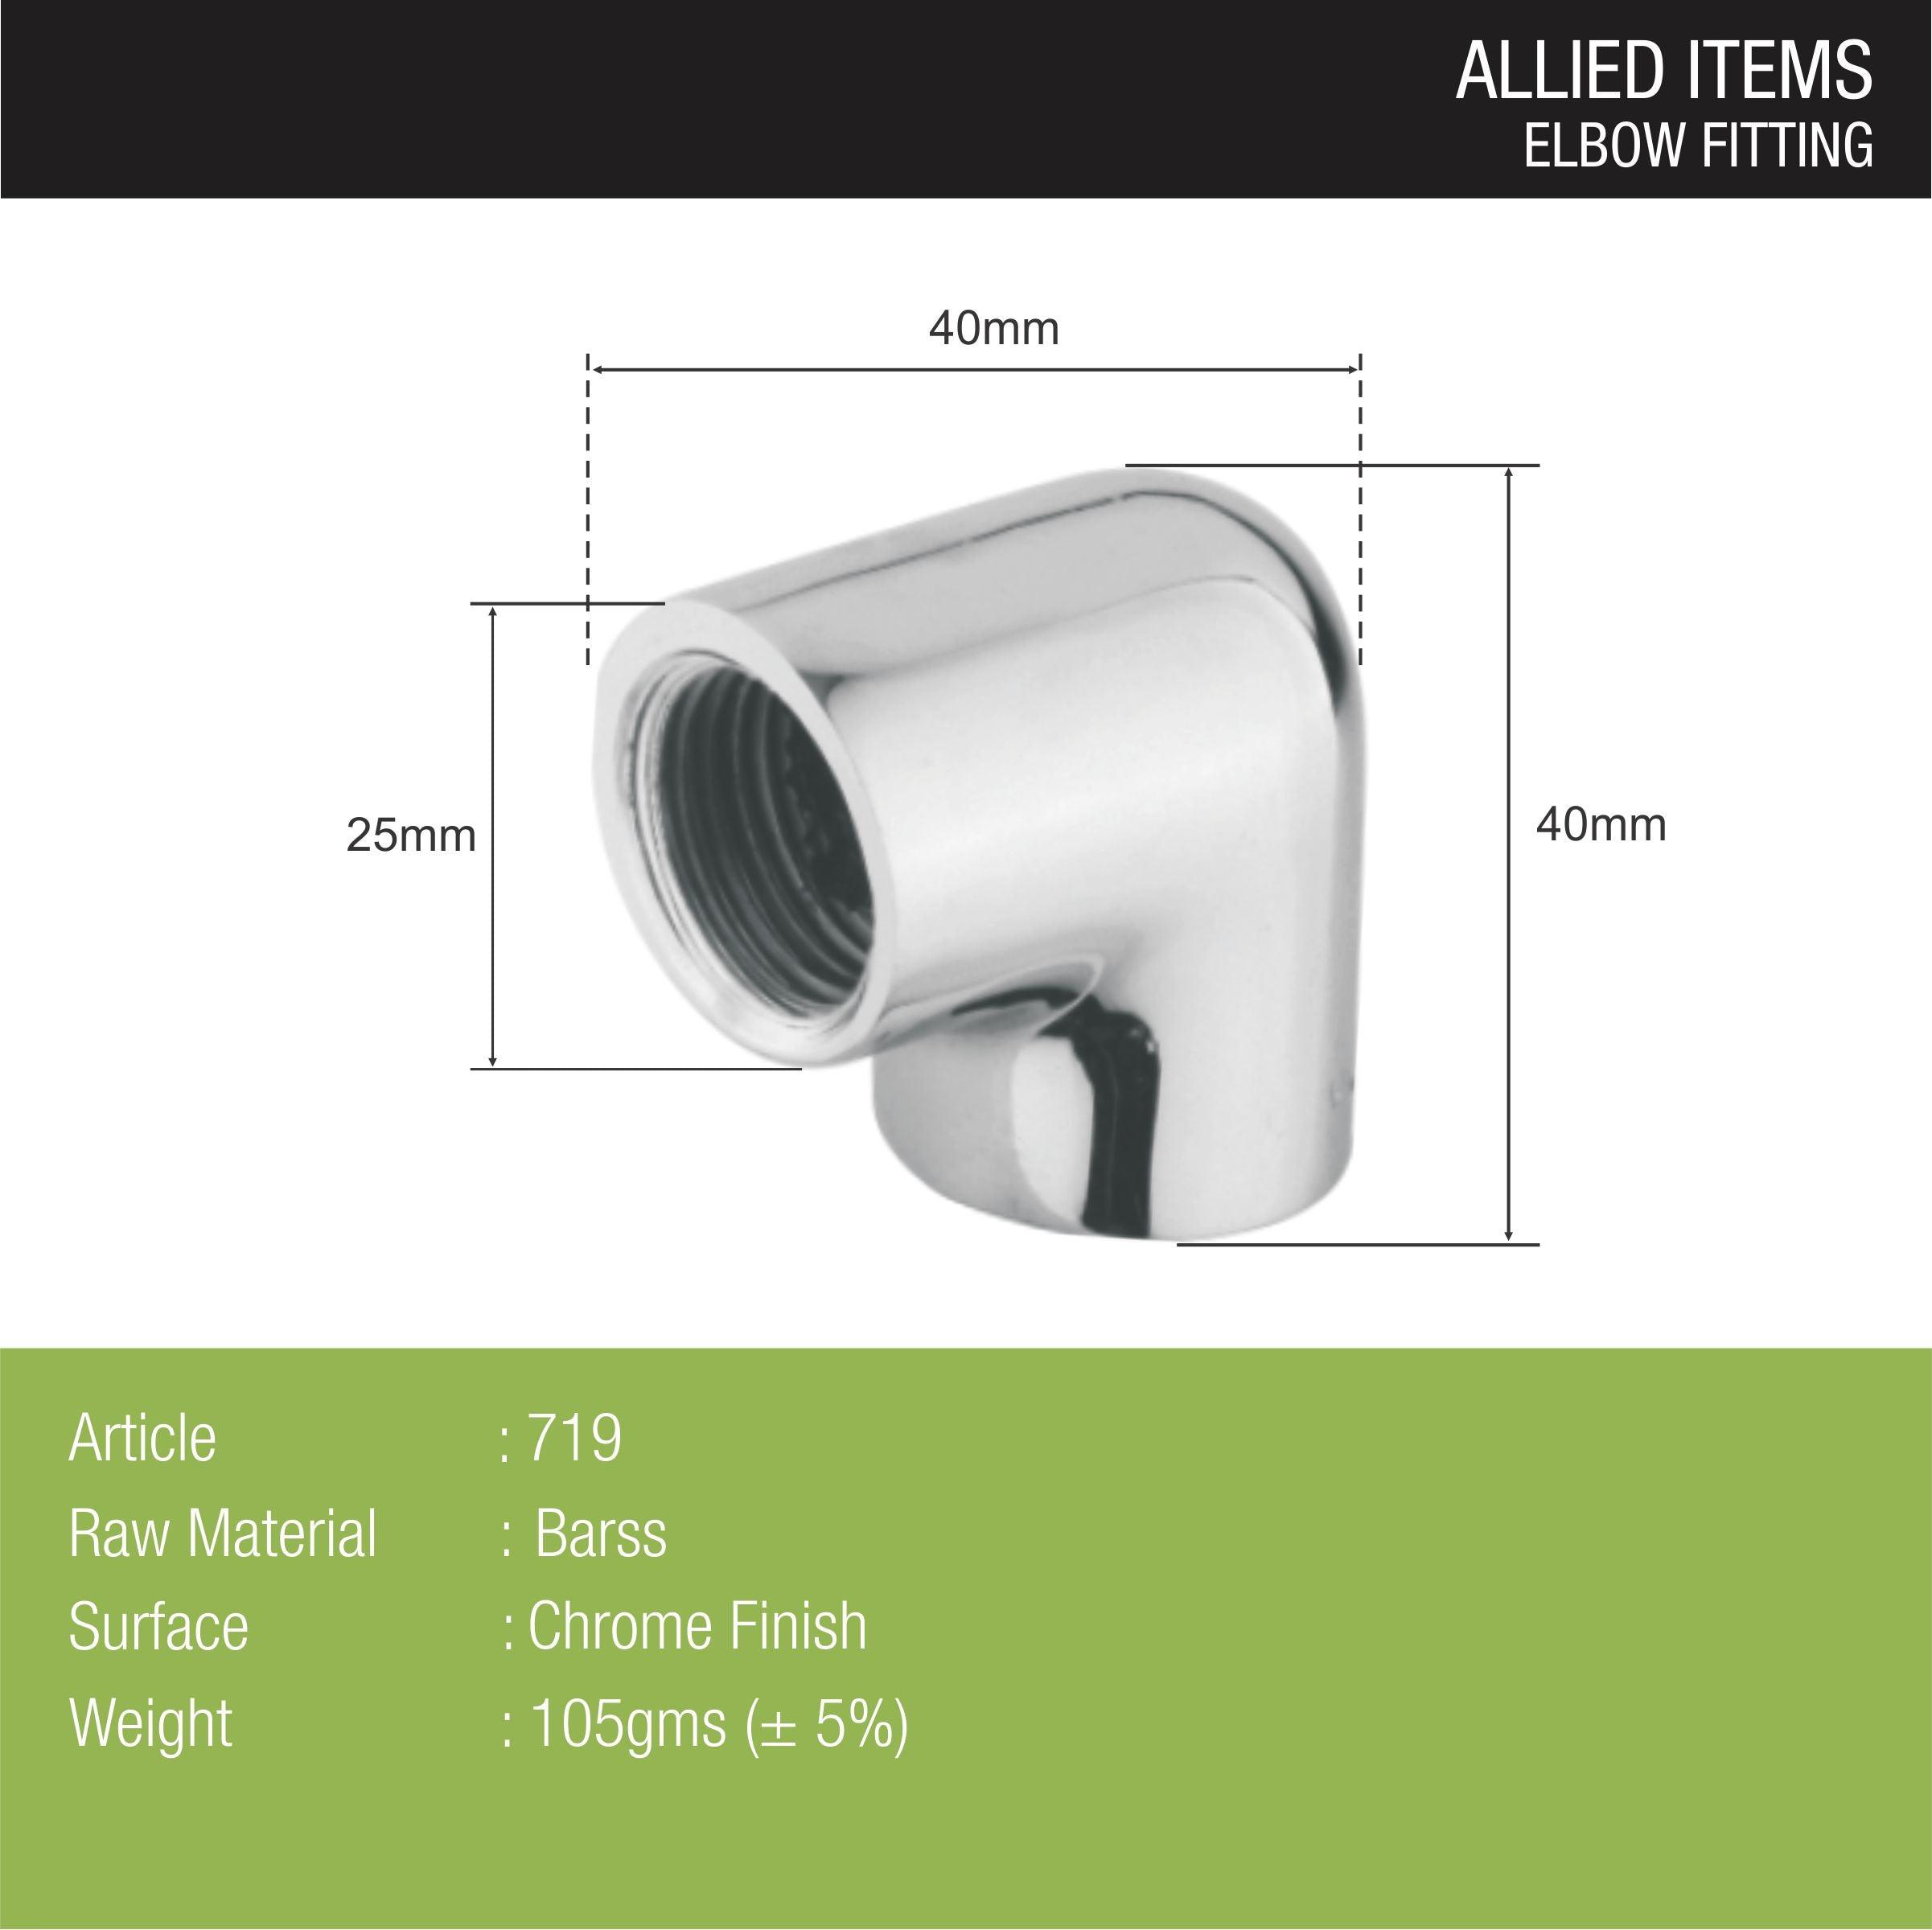 Elbow sizes and dimensions